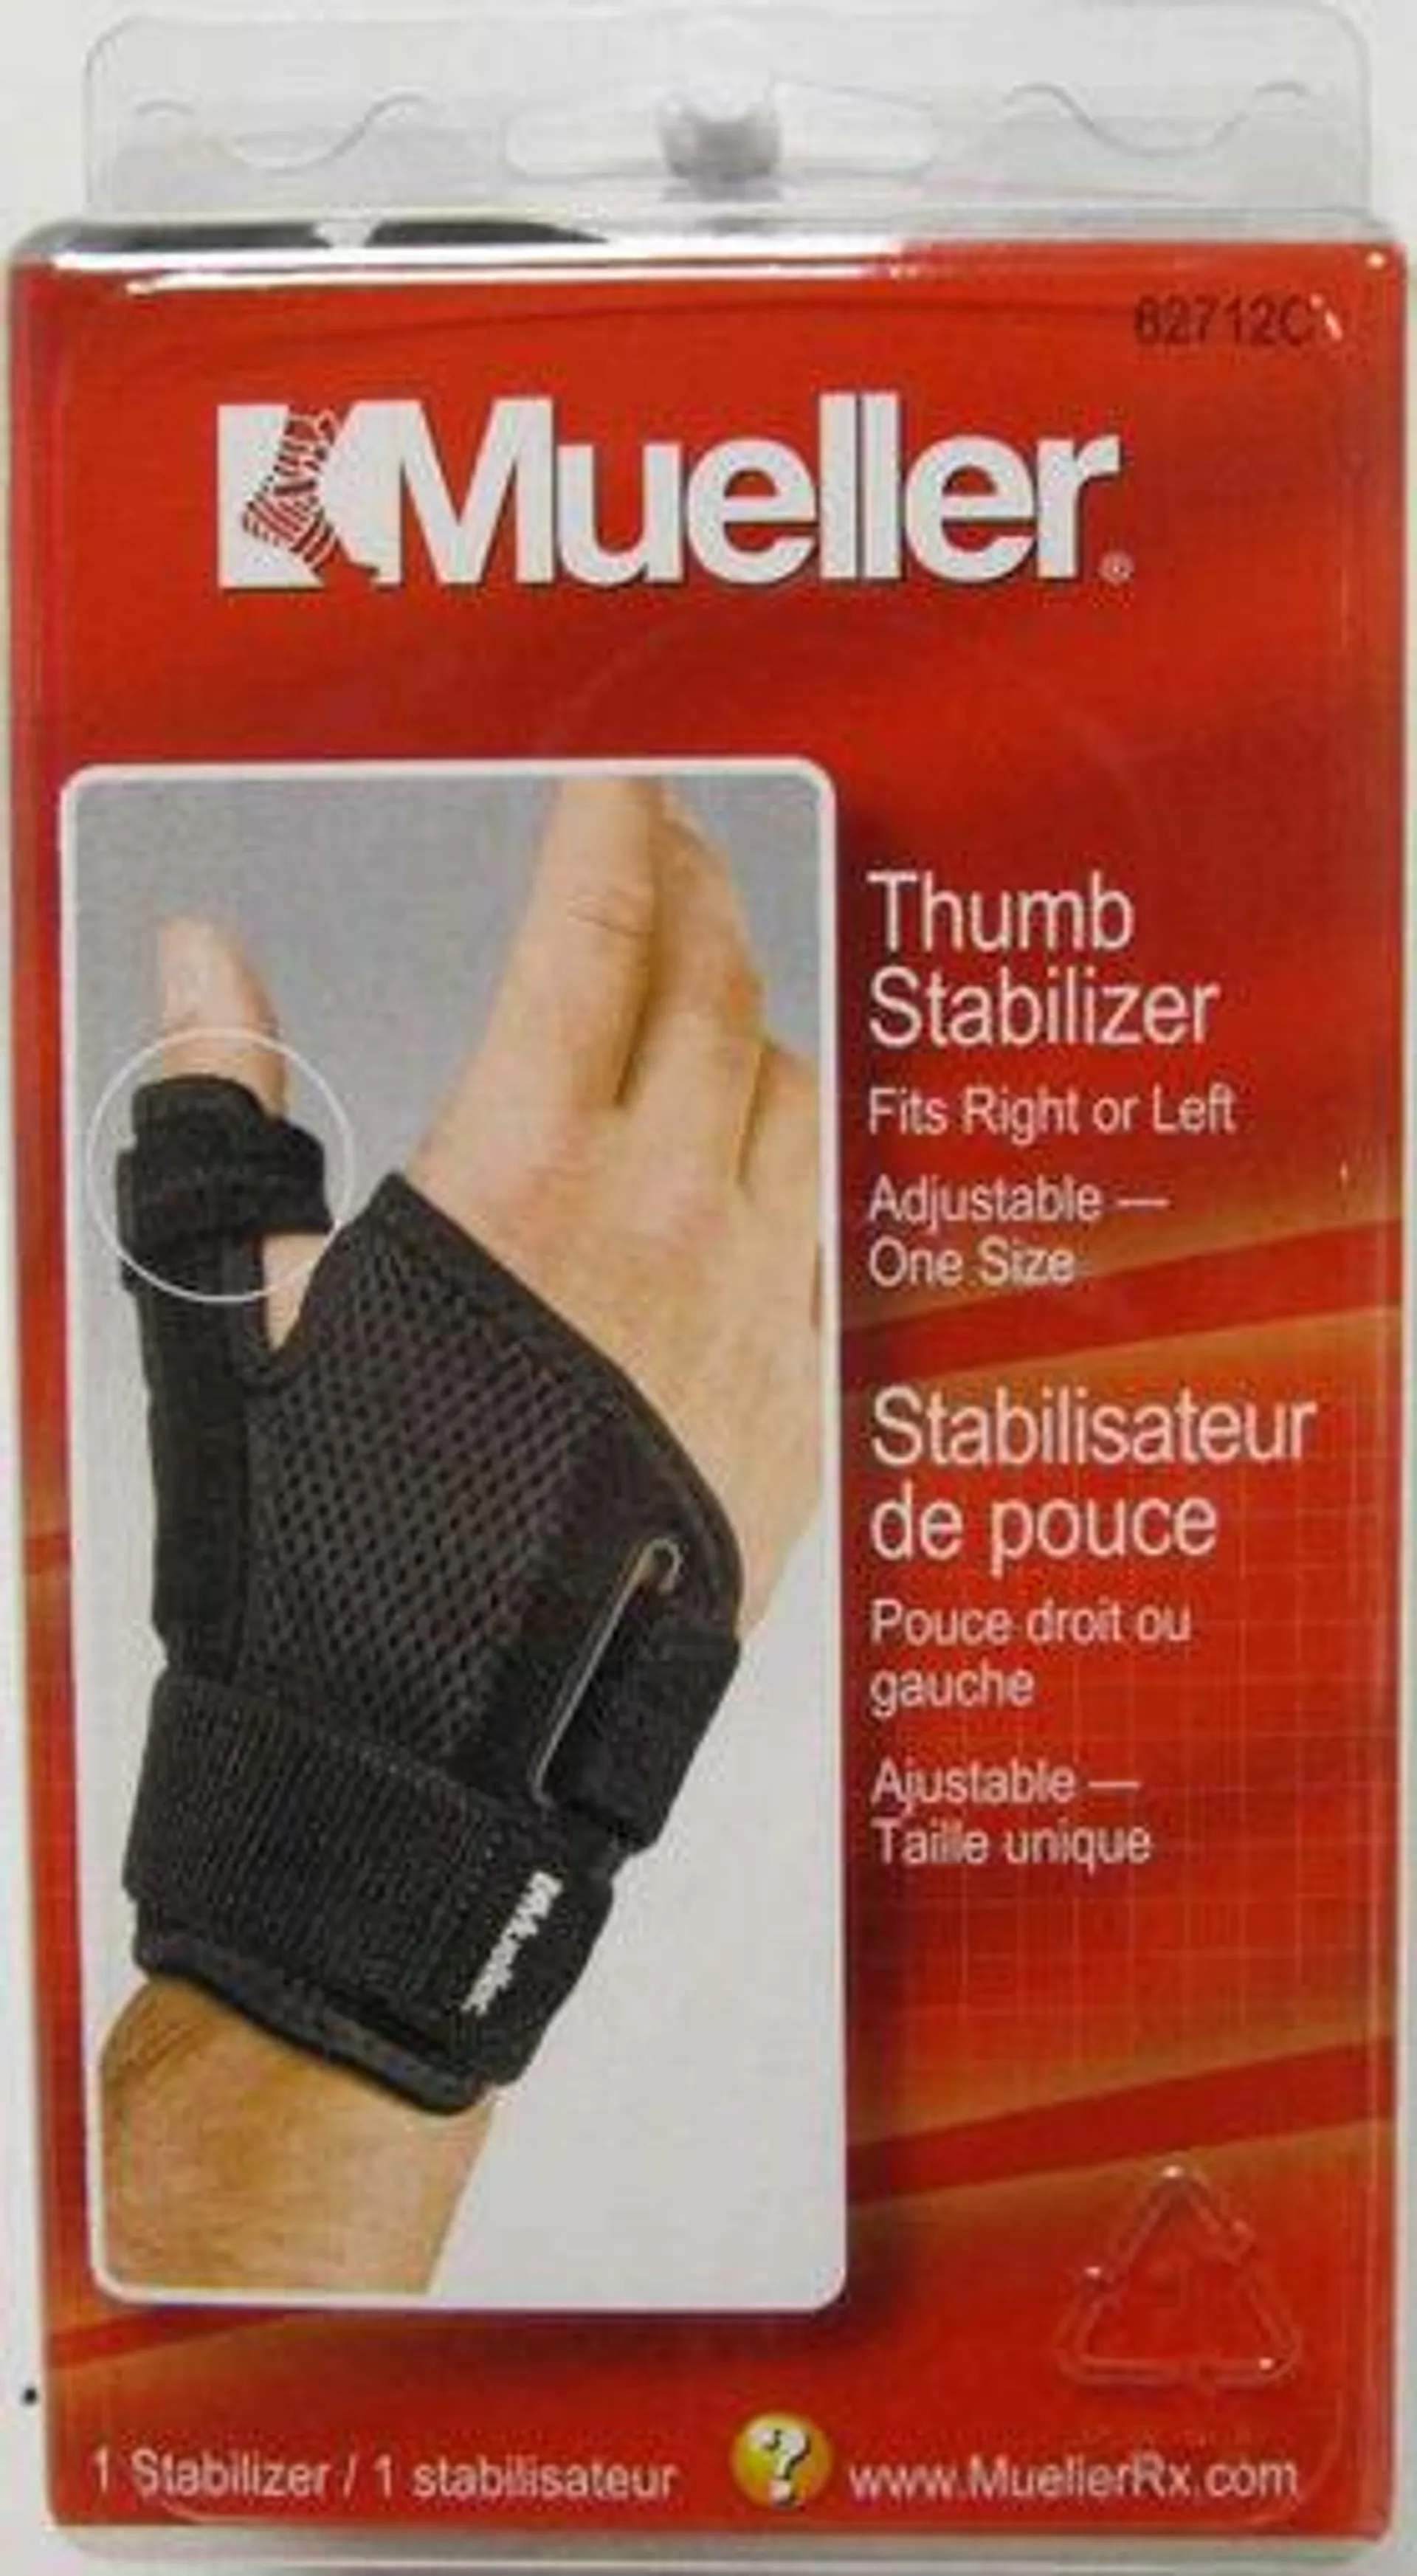 MUELLER THUMB STABILIZER - O/S